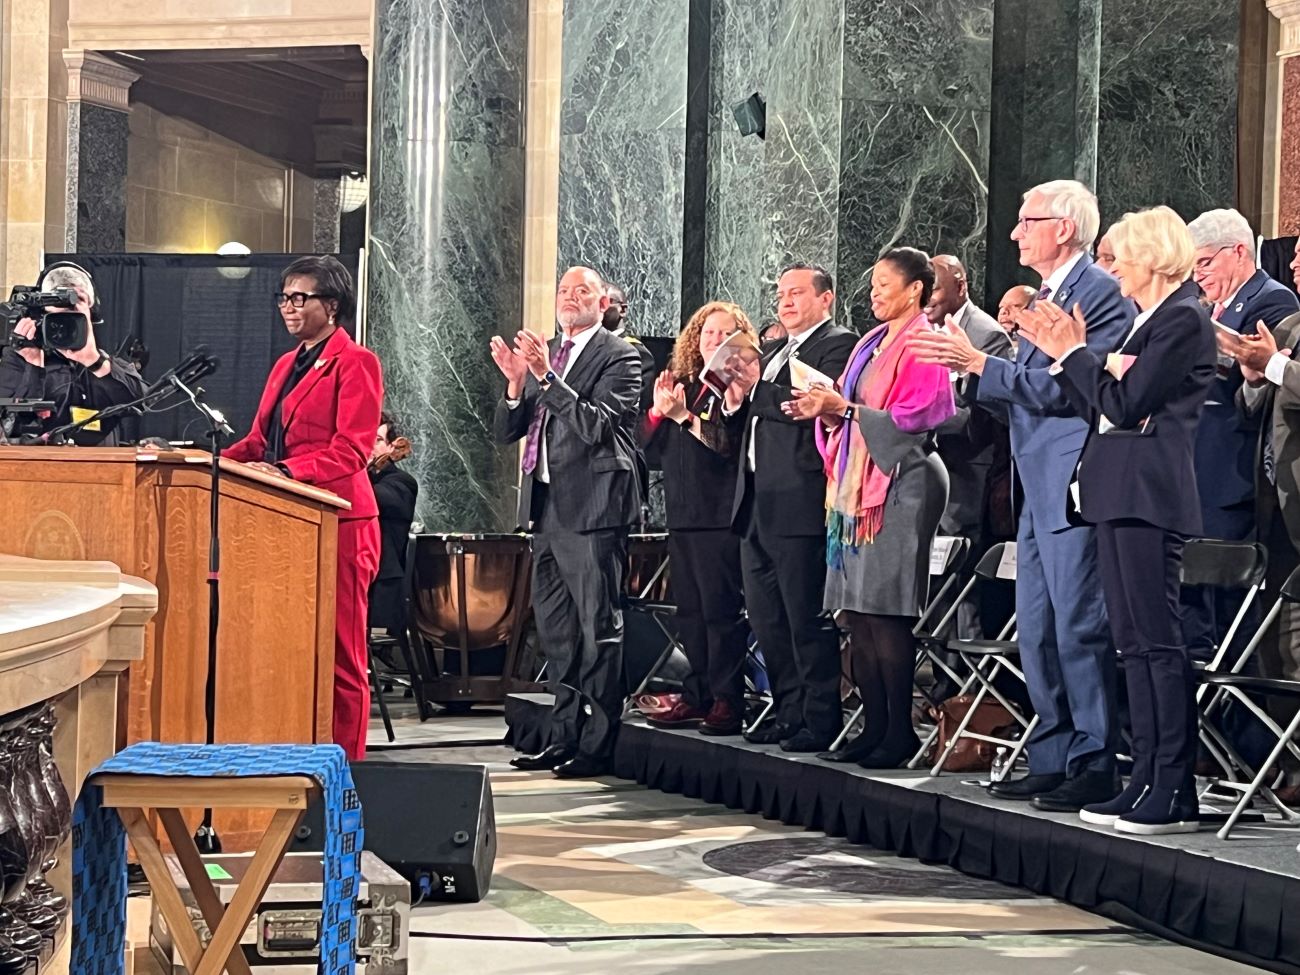 President Laurie Carter speaks at the podium as Gov. Evers and others applaud.